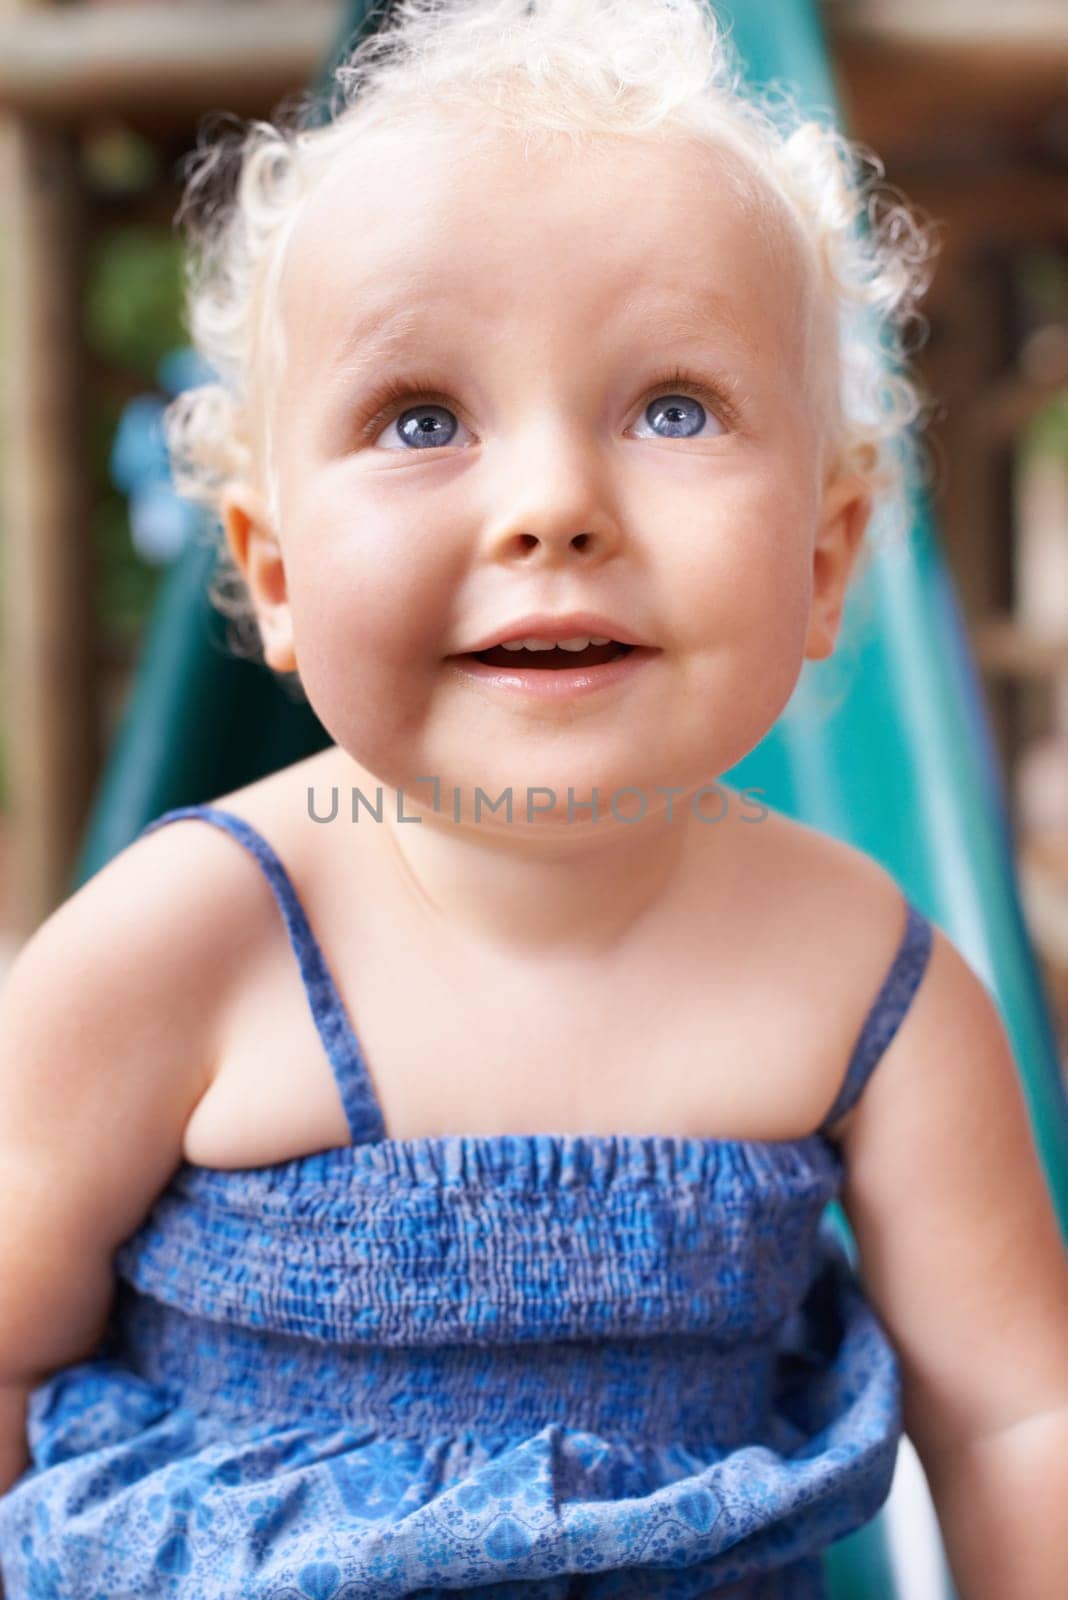 Baby, girl and child in home, happy and healthy kid alone in her house or kindergarten nursery. Face, cute blonde toddler and smile while playing, adorable and innocent facial expression of childhood.